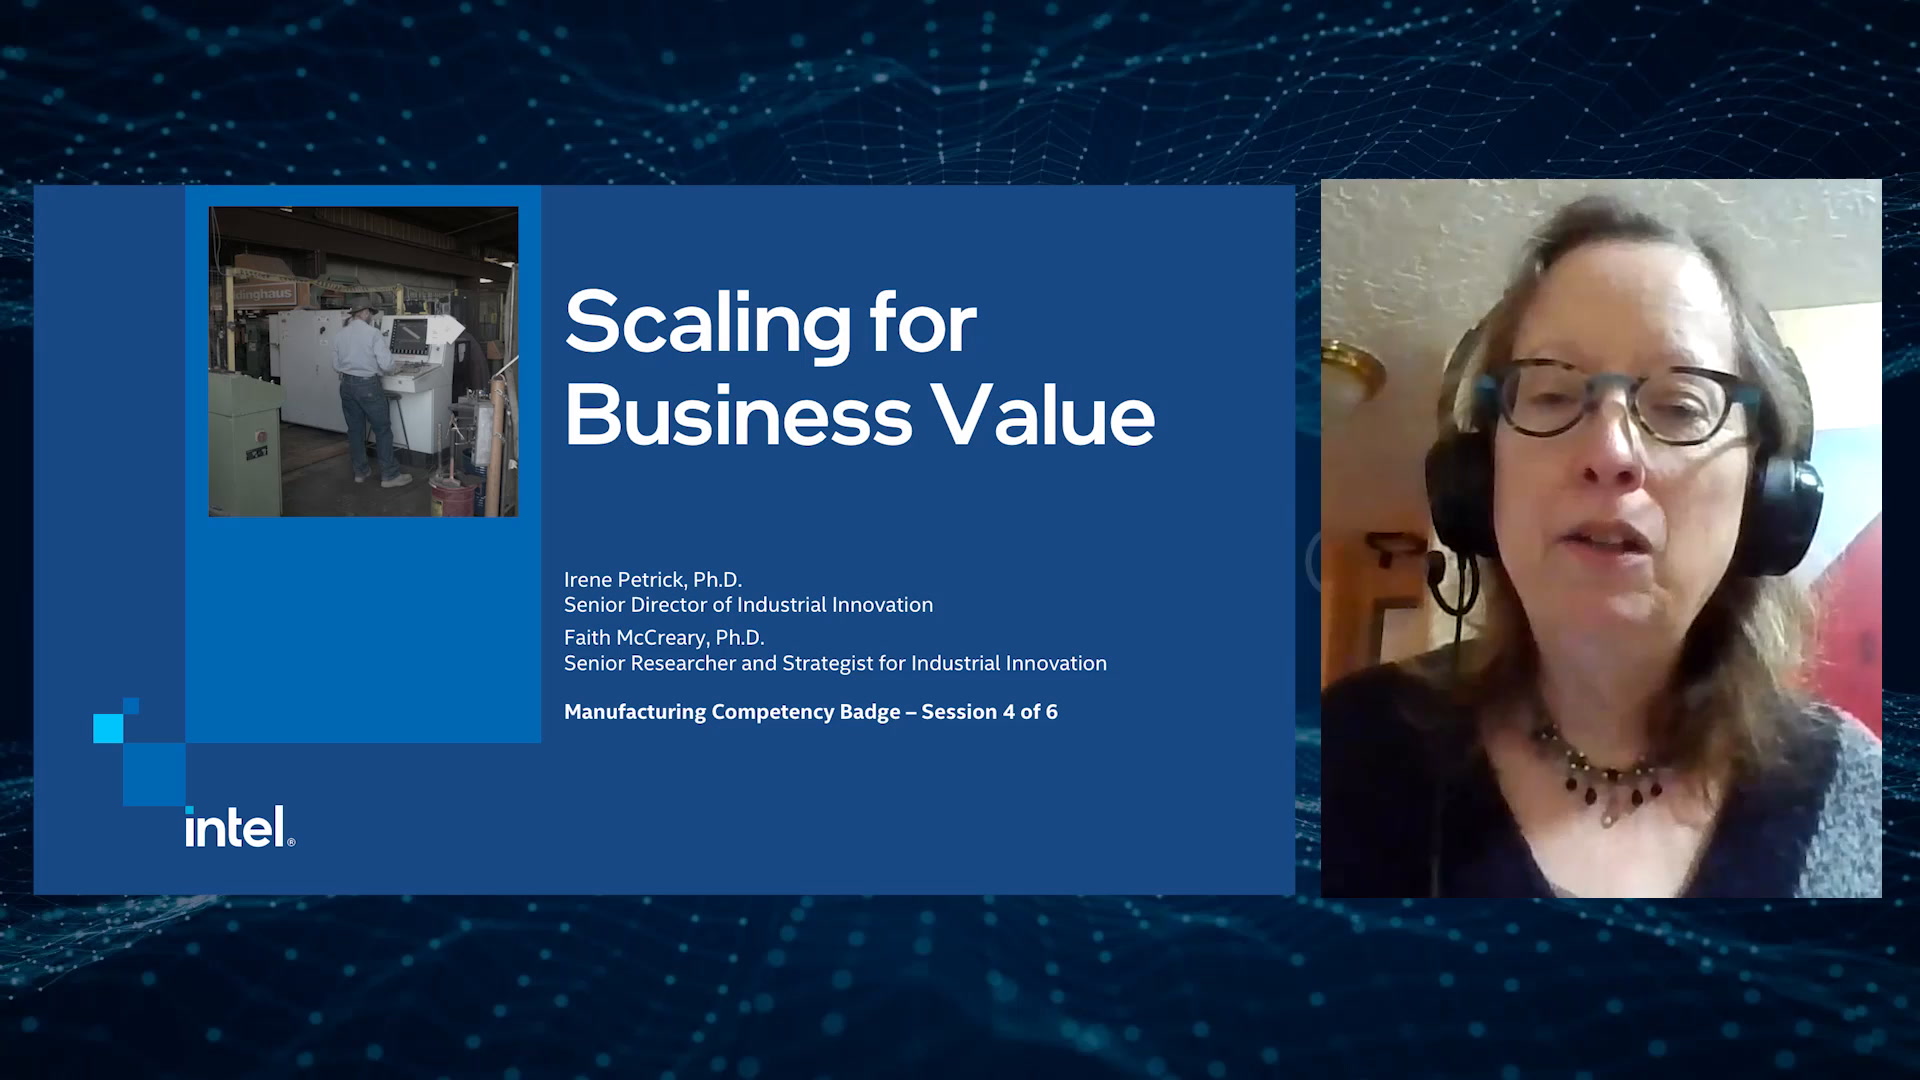 Chapter 1: Scaling for Business Value